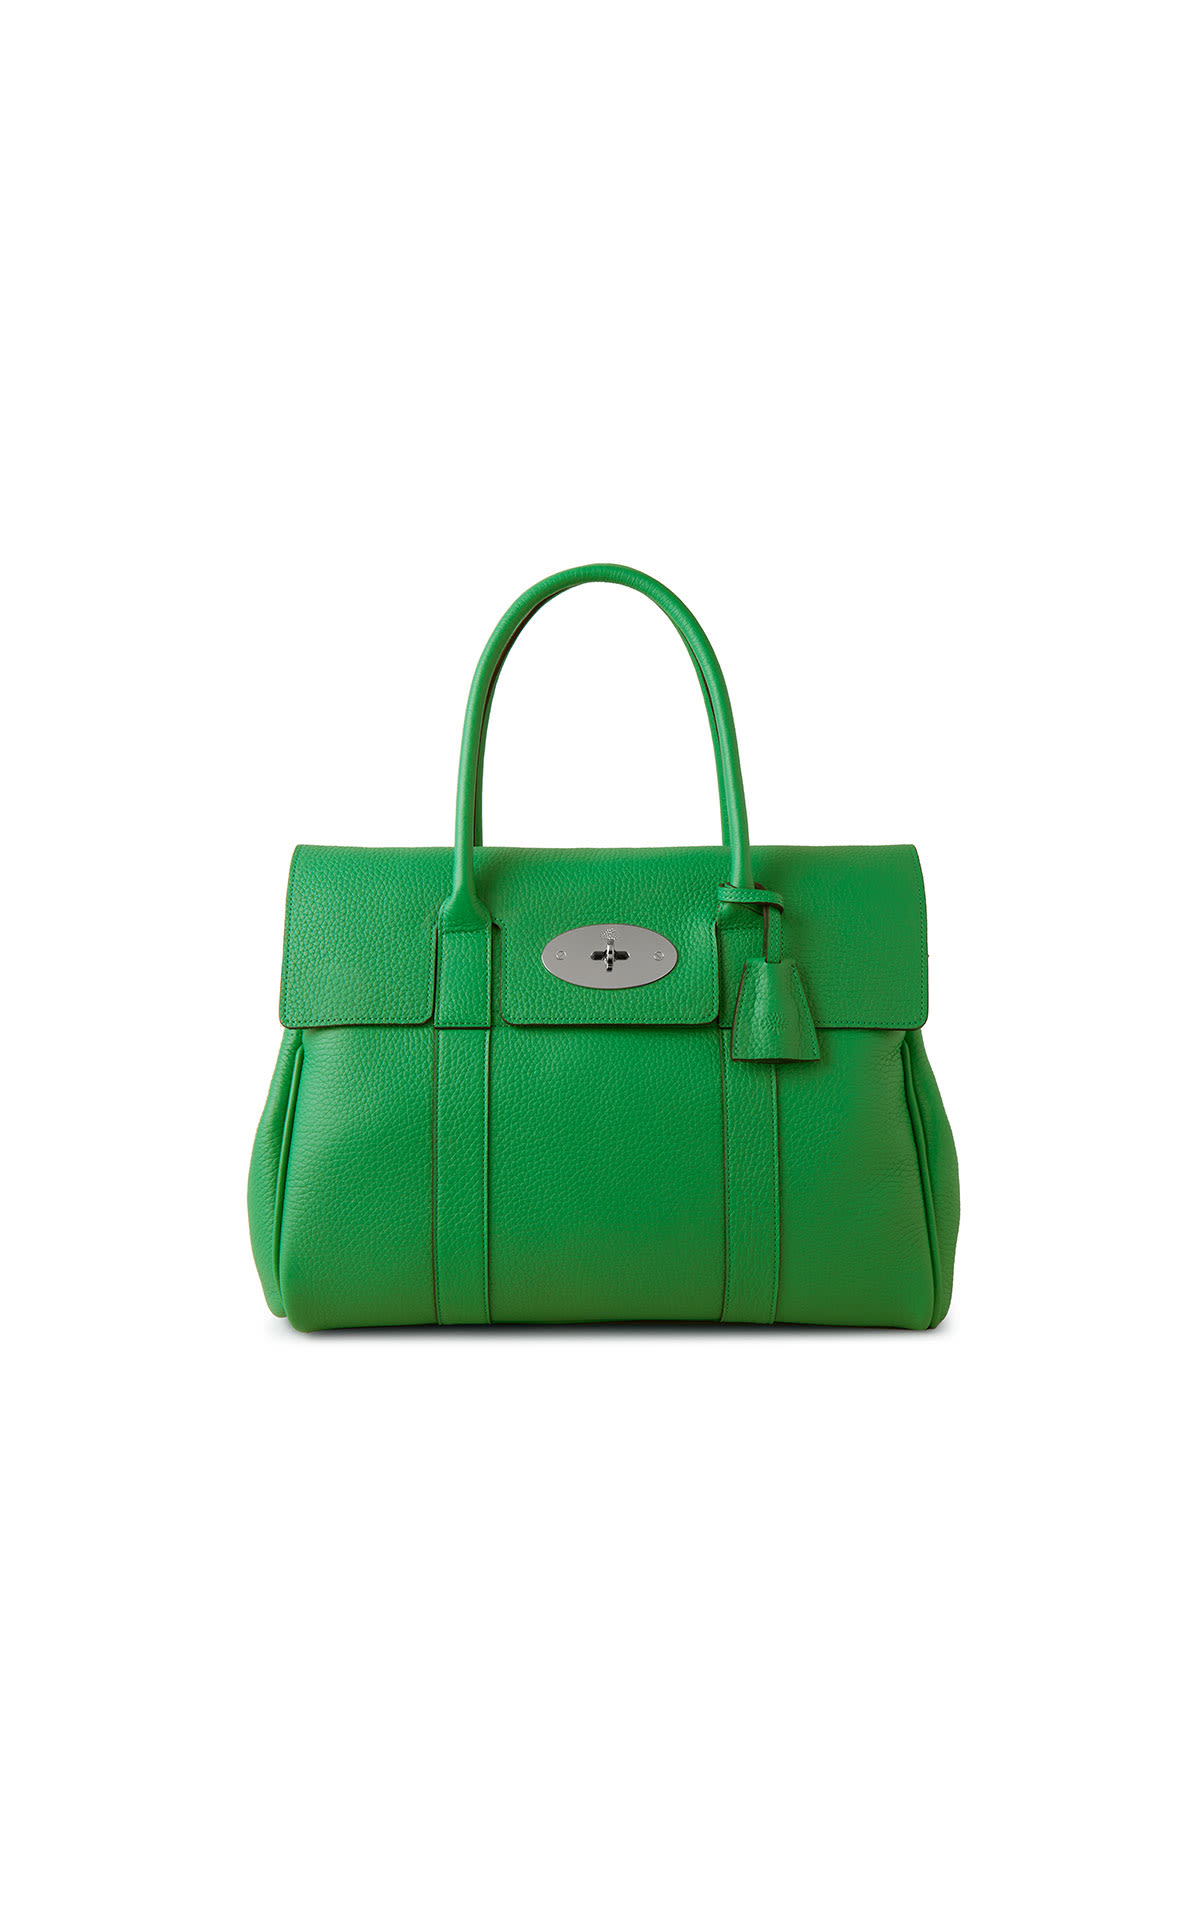 Mulberry Bayswater heavy grain from Bicester Village